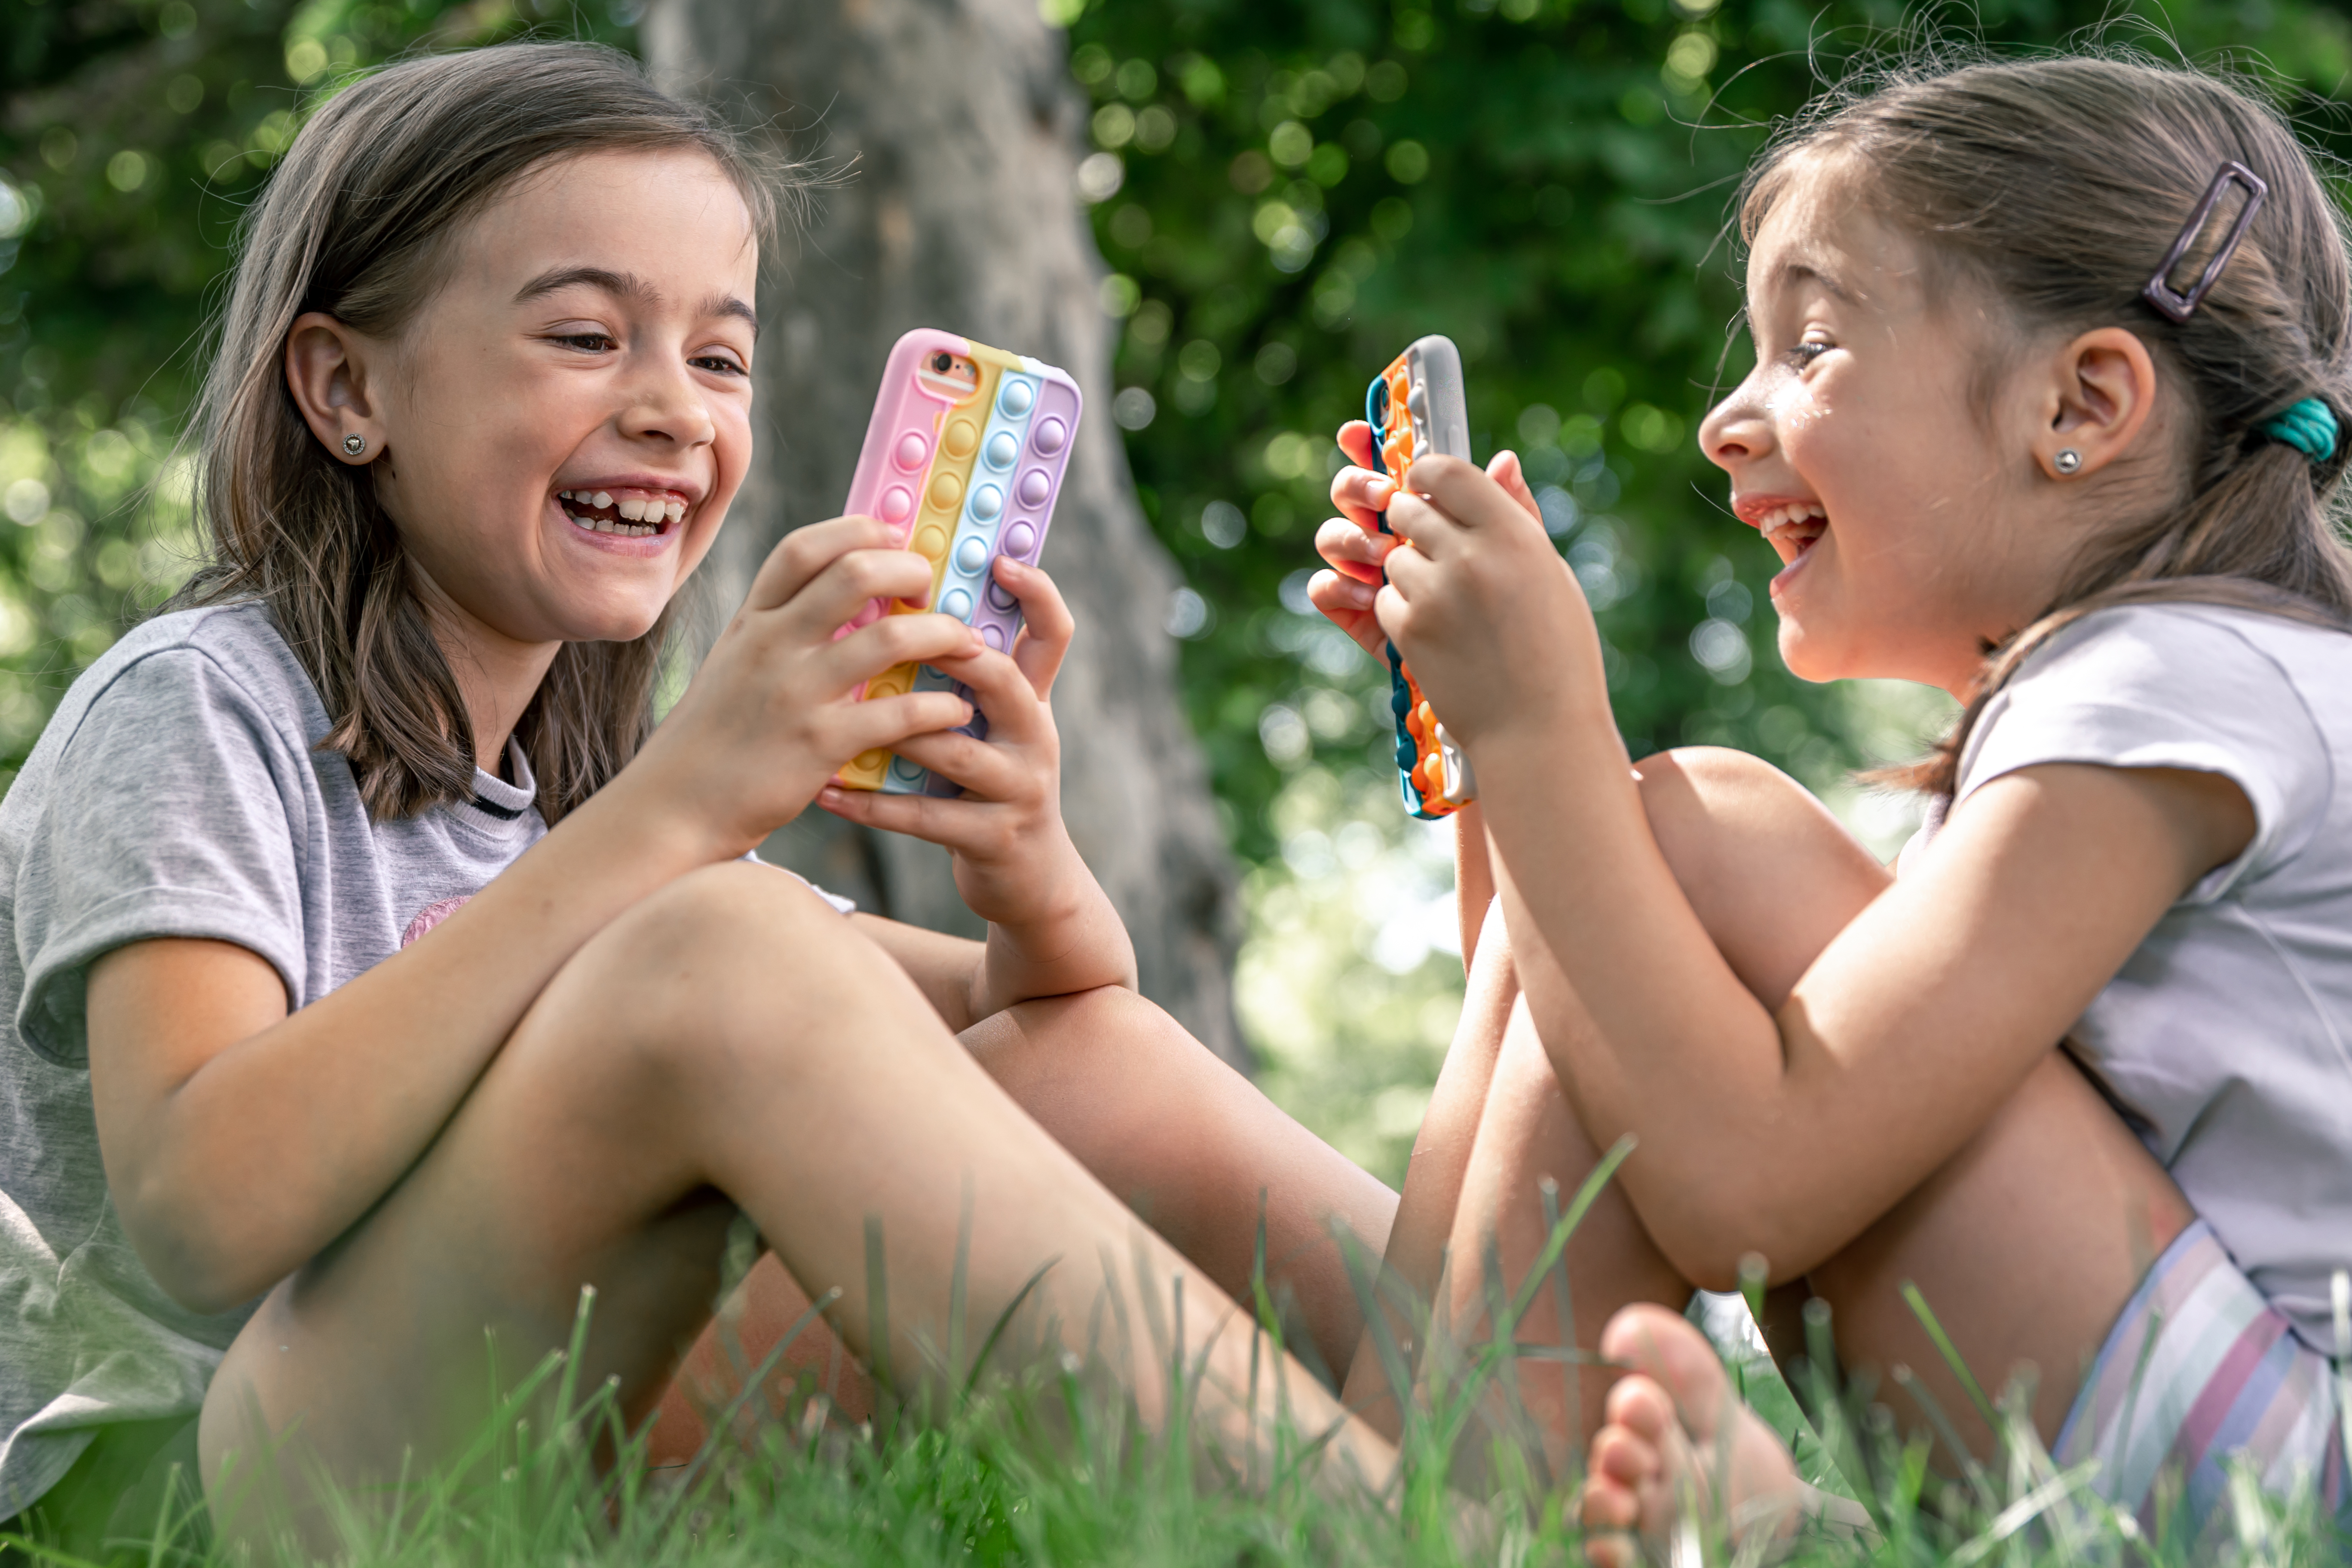 Little girls outdoors with phones in a case with pimples pop it, a trendy anti stress toy.